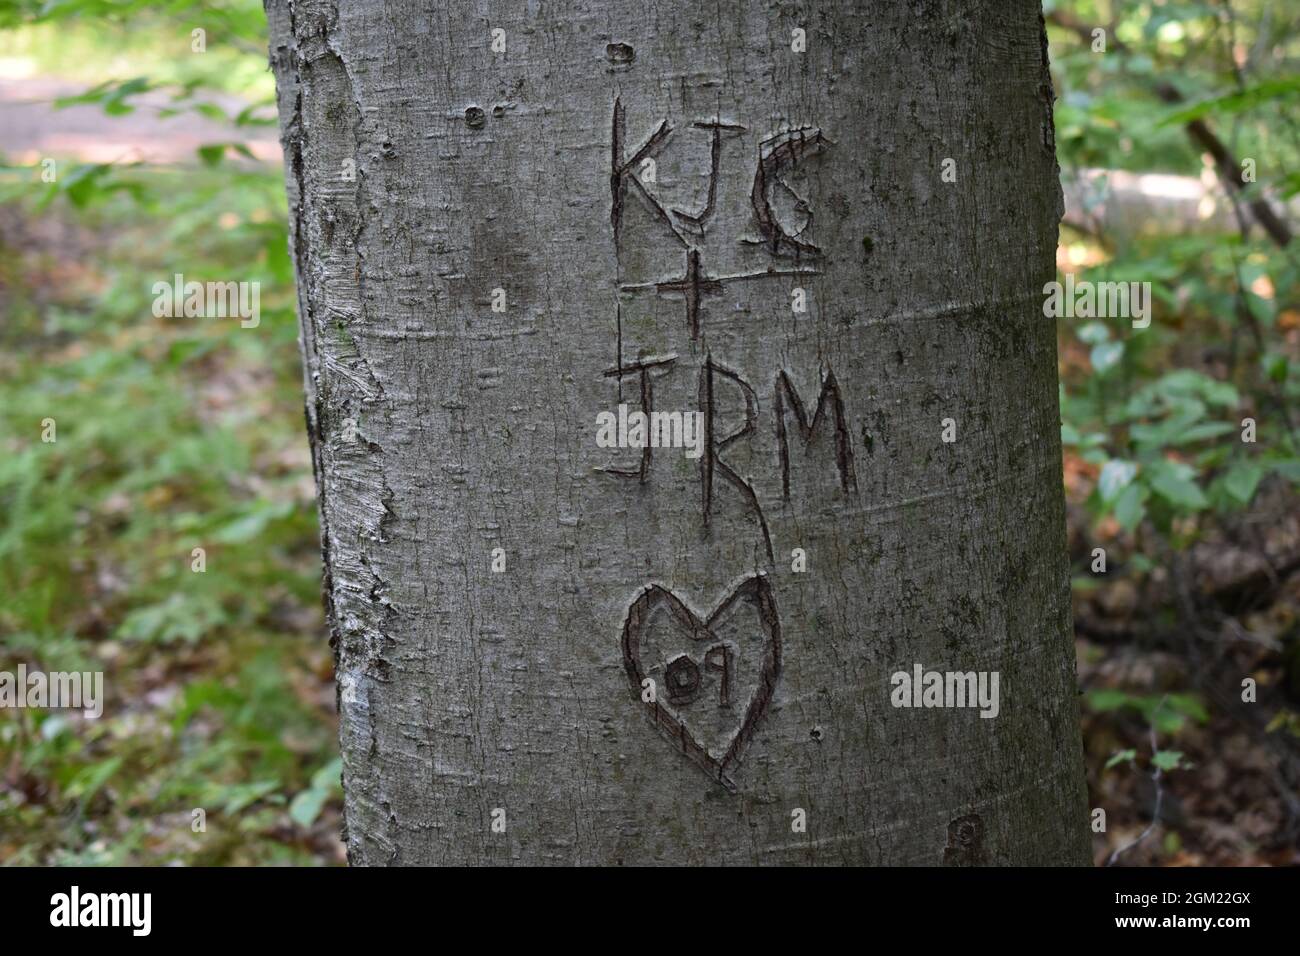 Initials and heart carved into tree creating human eyesore Stock Photo